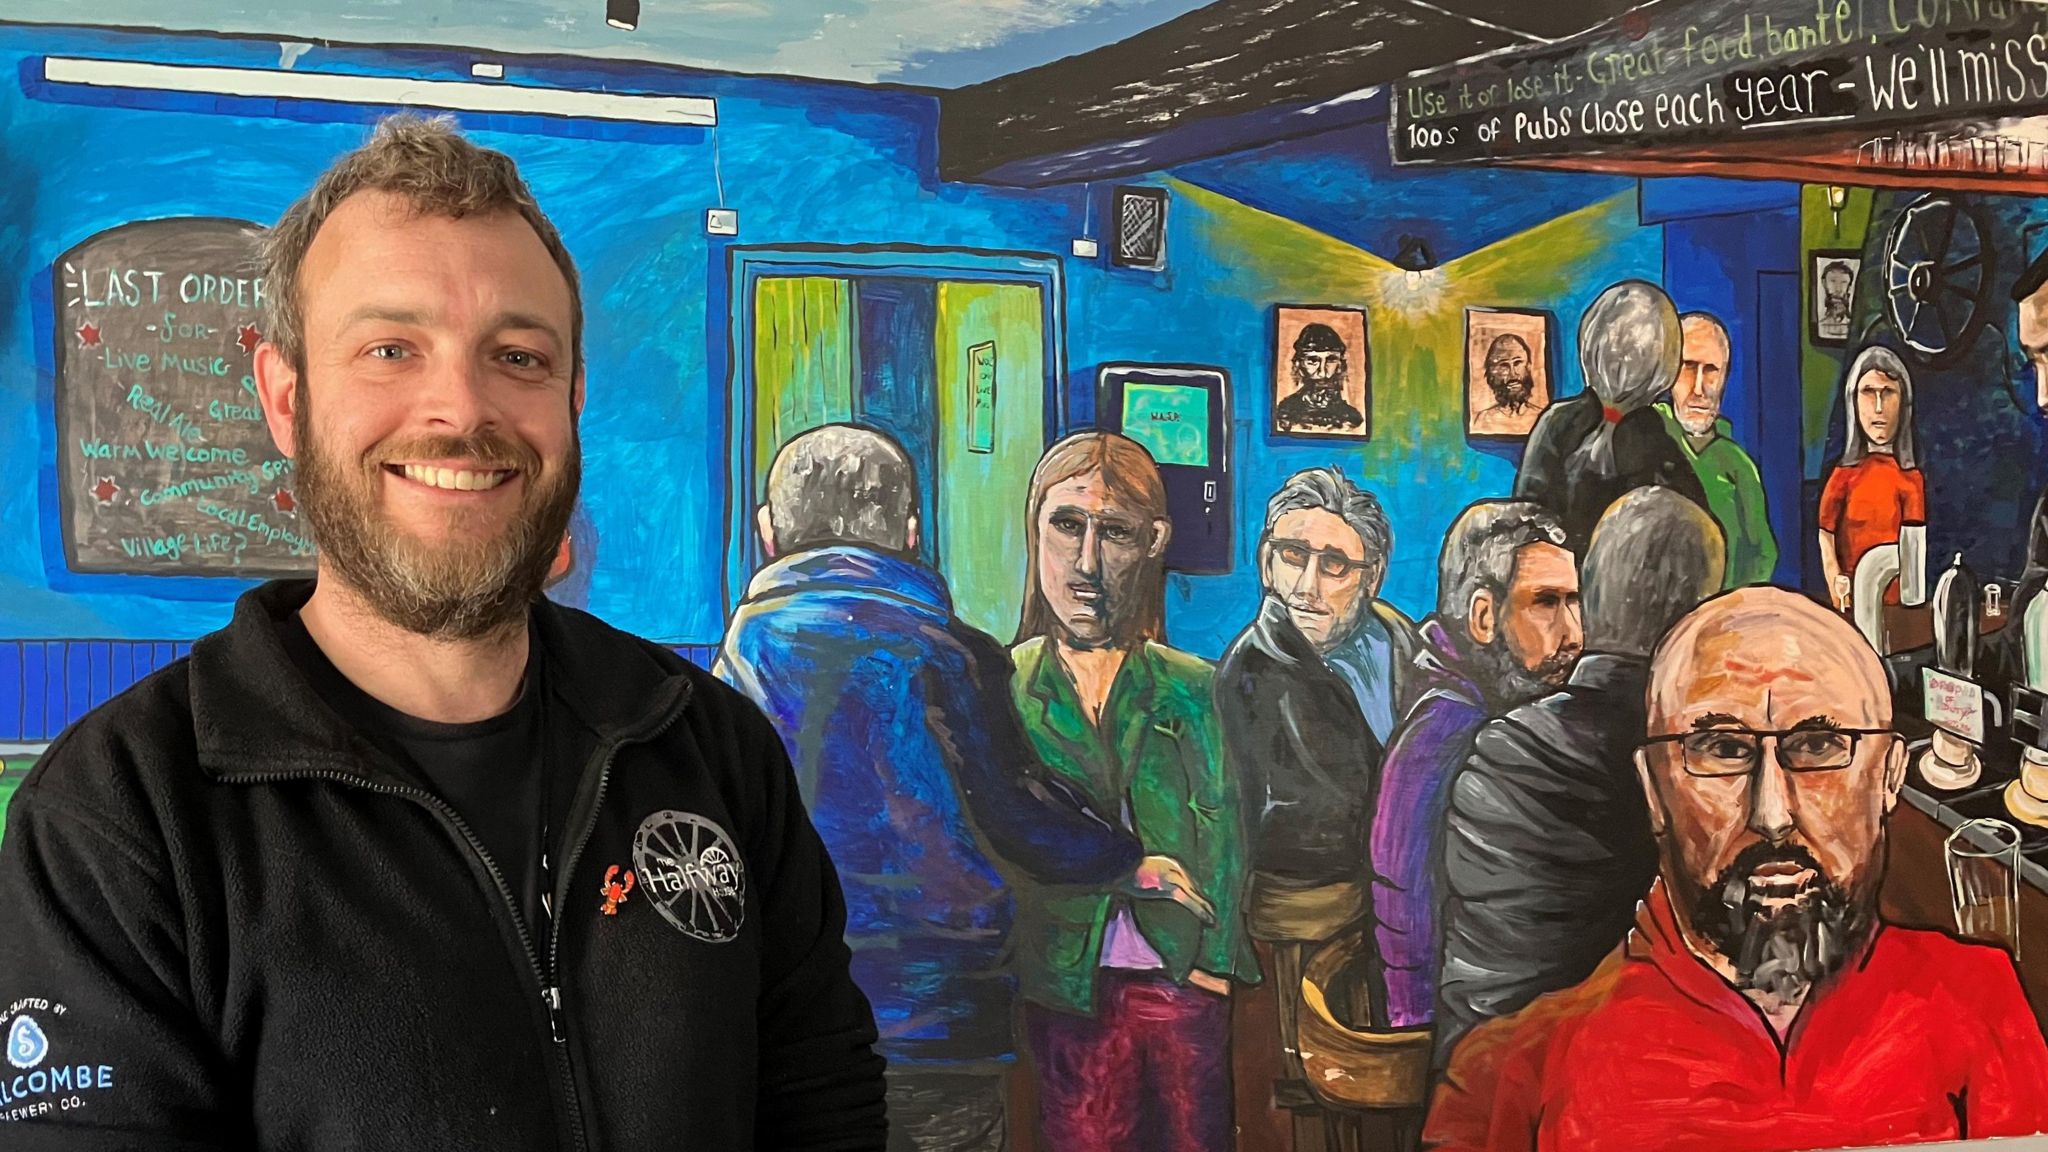 Man standing in pub in front of mural 